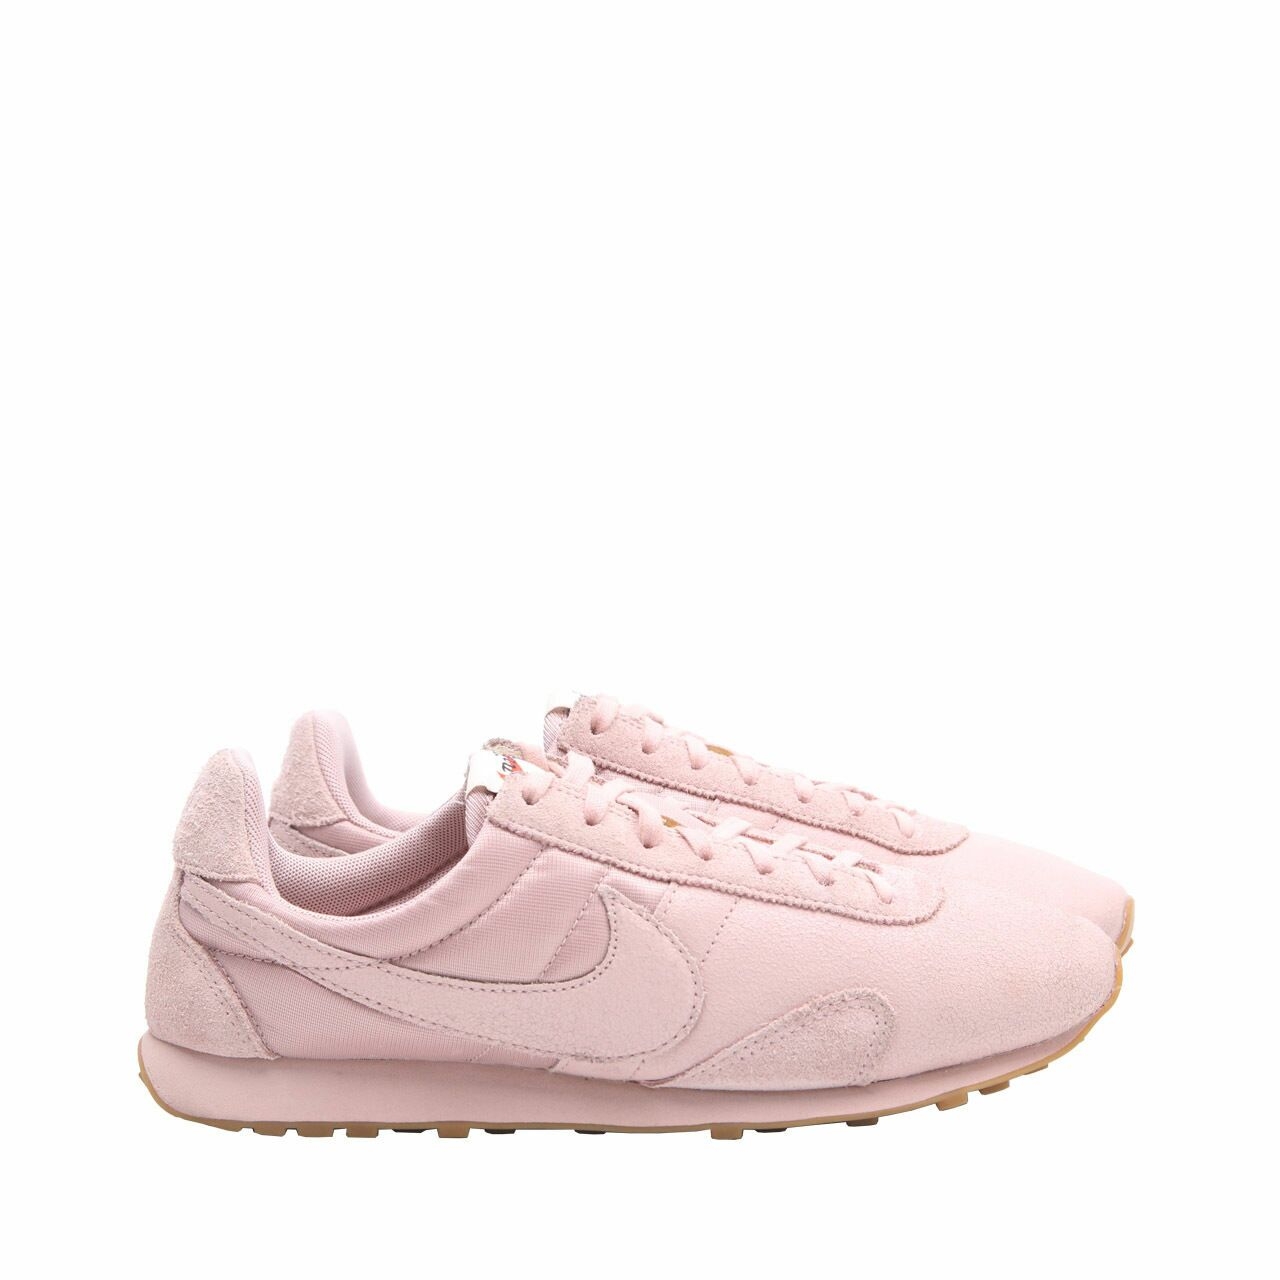 Nike Wmns Pre Montreal Racer Vntg Prm Pink Oxford Sneakers